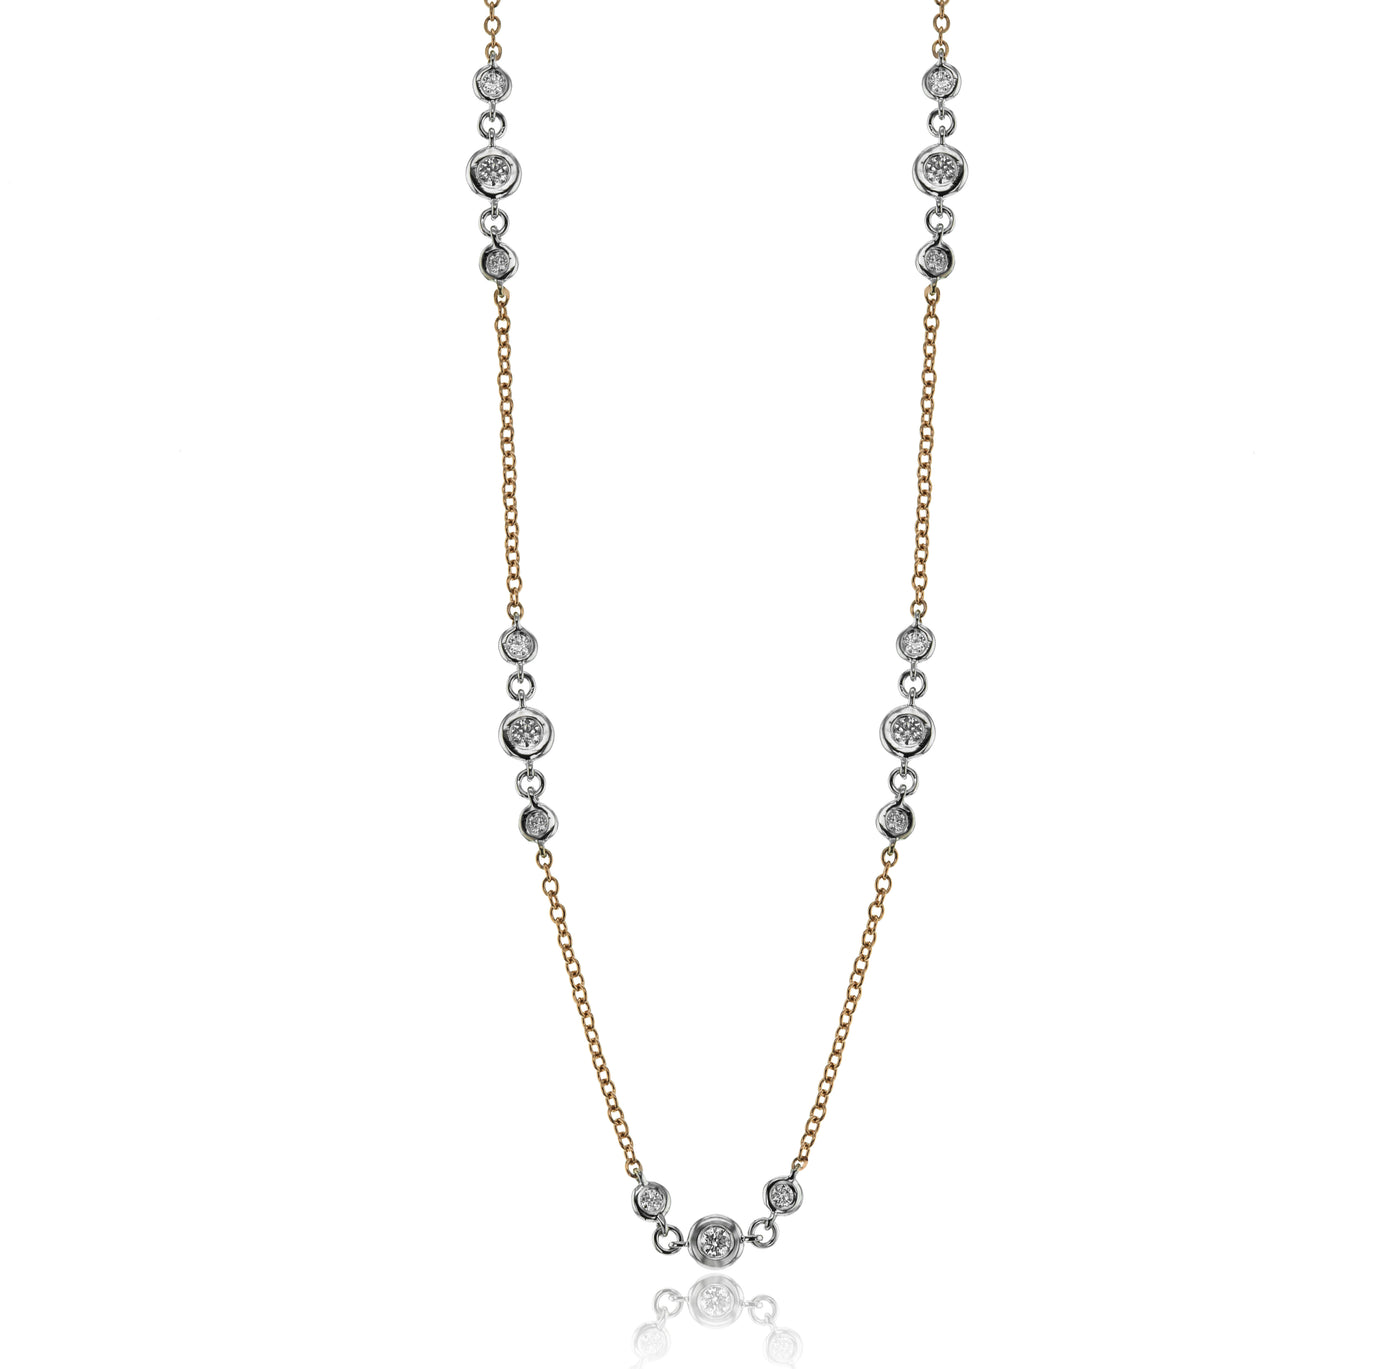 Apparel & Accessories > Jewelry > Necklaces Simon G Diamond Necklace in 18K White and Yellow Gold CH112 Pierce Custom Jewelers